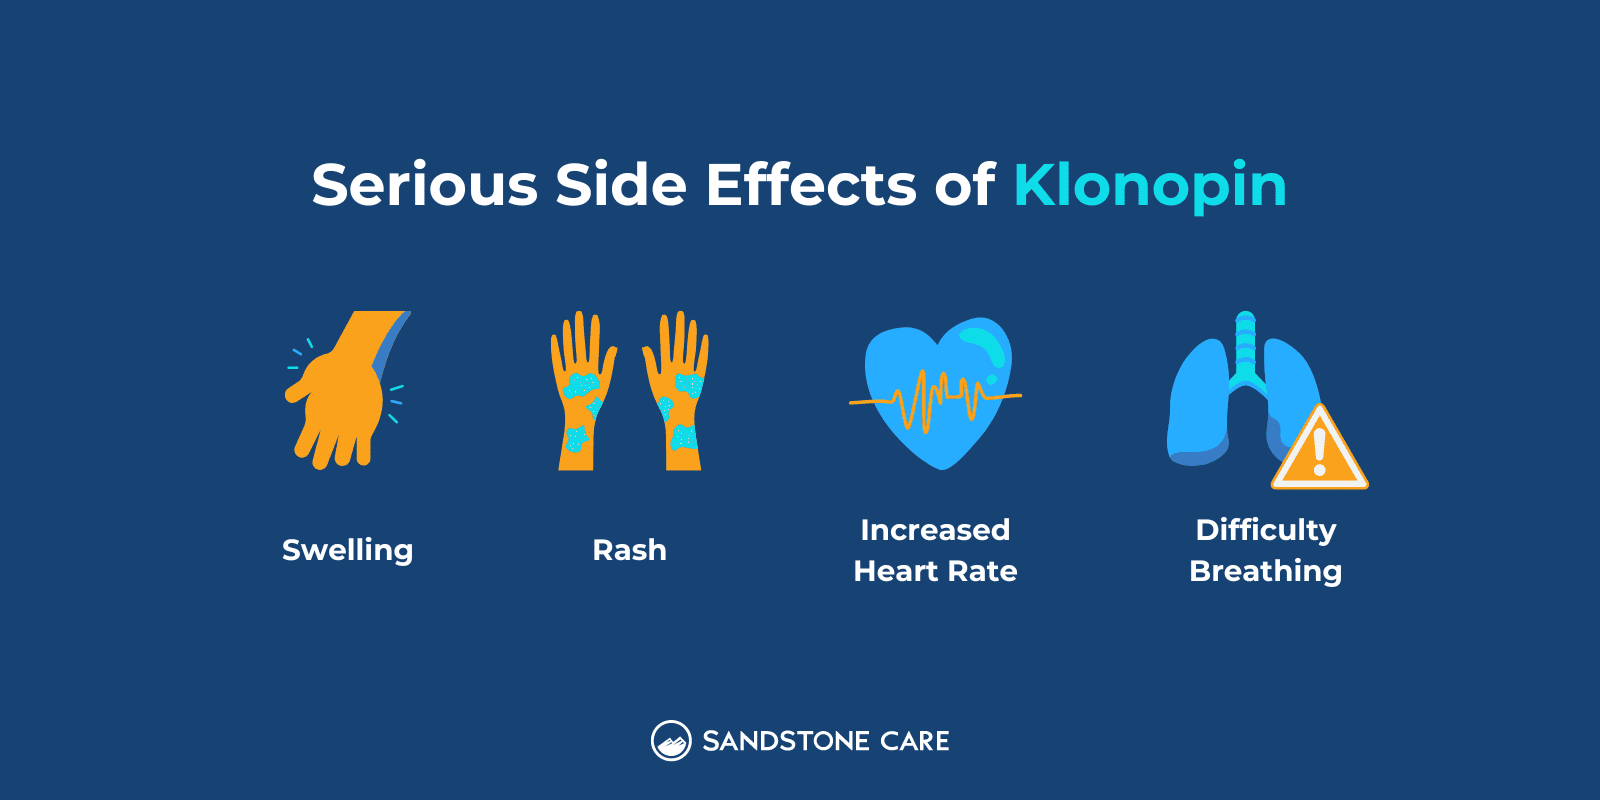 Serious side effects of Klonopin with illustration of a swollen hand, skin rash, heart with beating signal, and a lung illustration with a warning sign